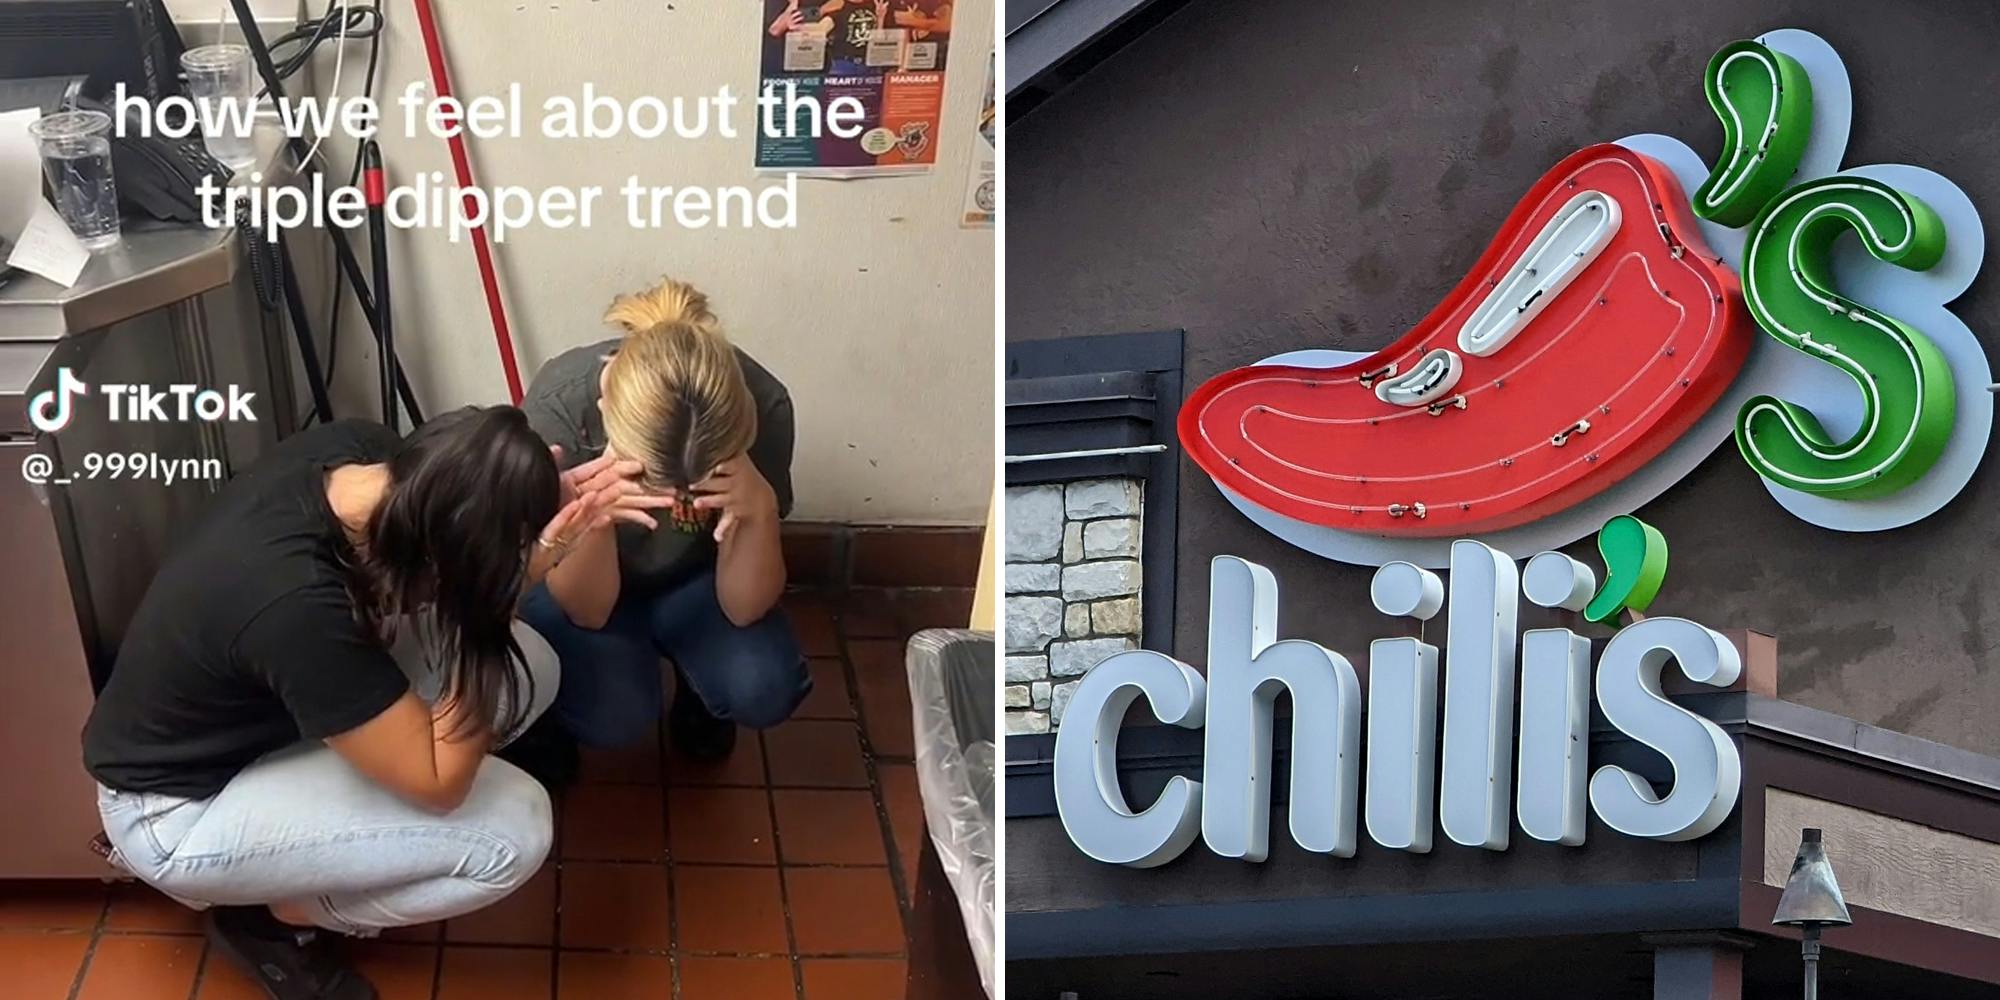 two young women squatting with their heads in their hands, caption "how we feel about the triple dipper trend" (l) Chili's restaurant sign (r)